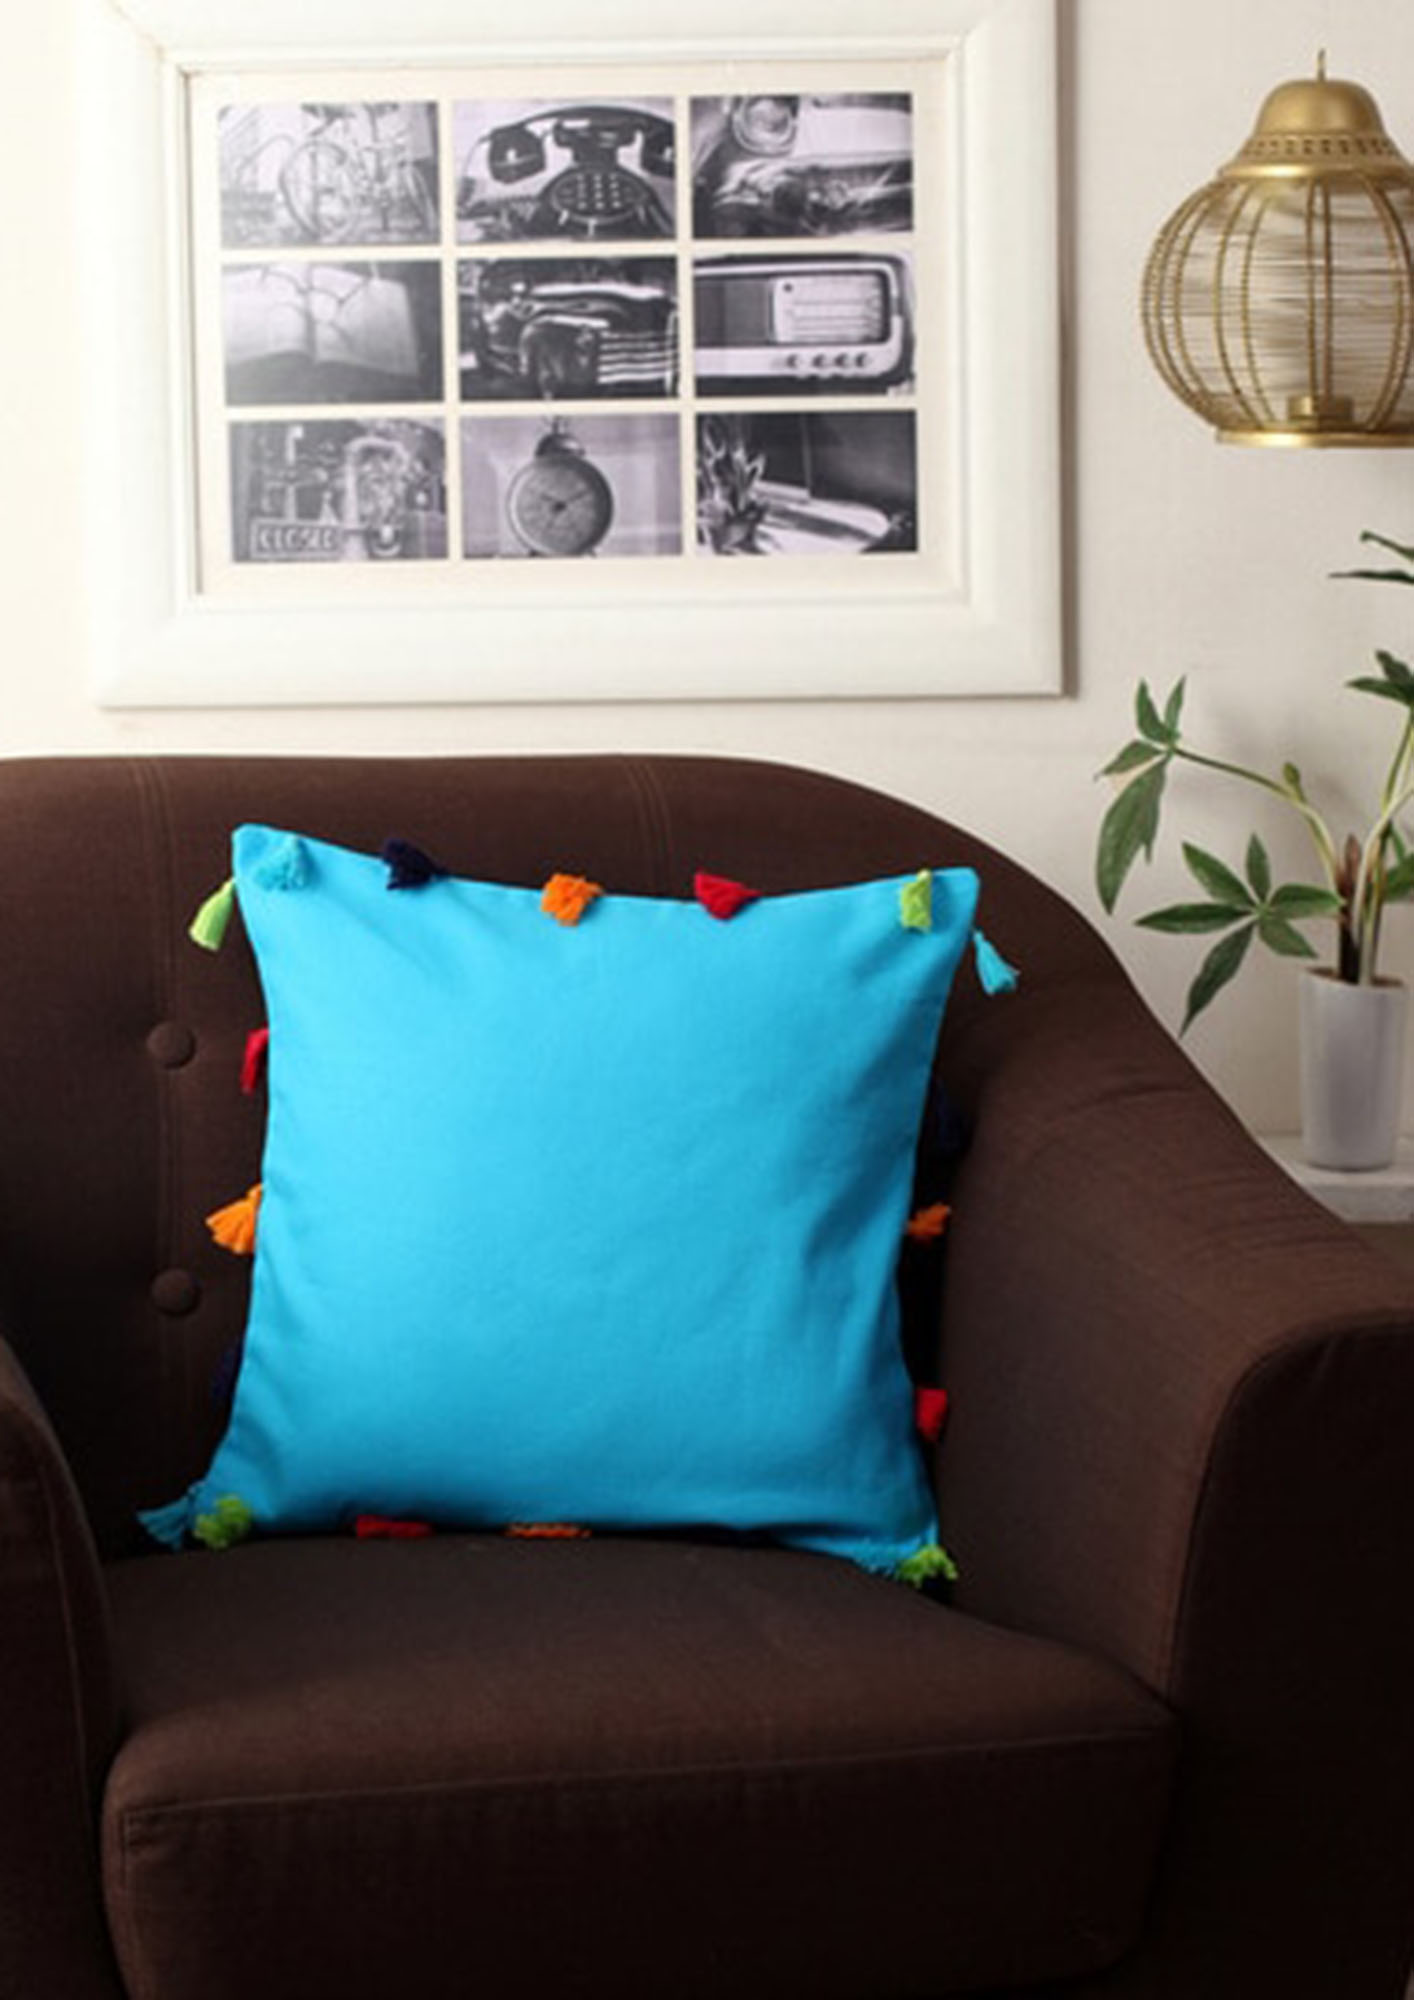 Lushomes Blue Sofa Cushion Cover Online with Colorful Tassels (Single pc, 14 x 14 inches)